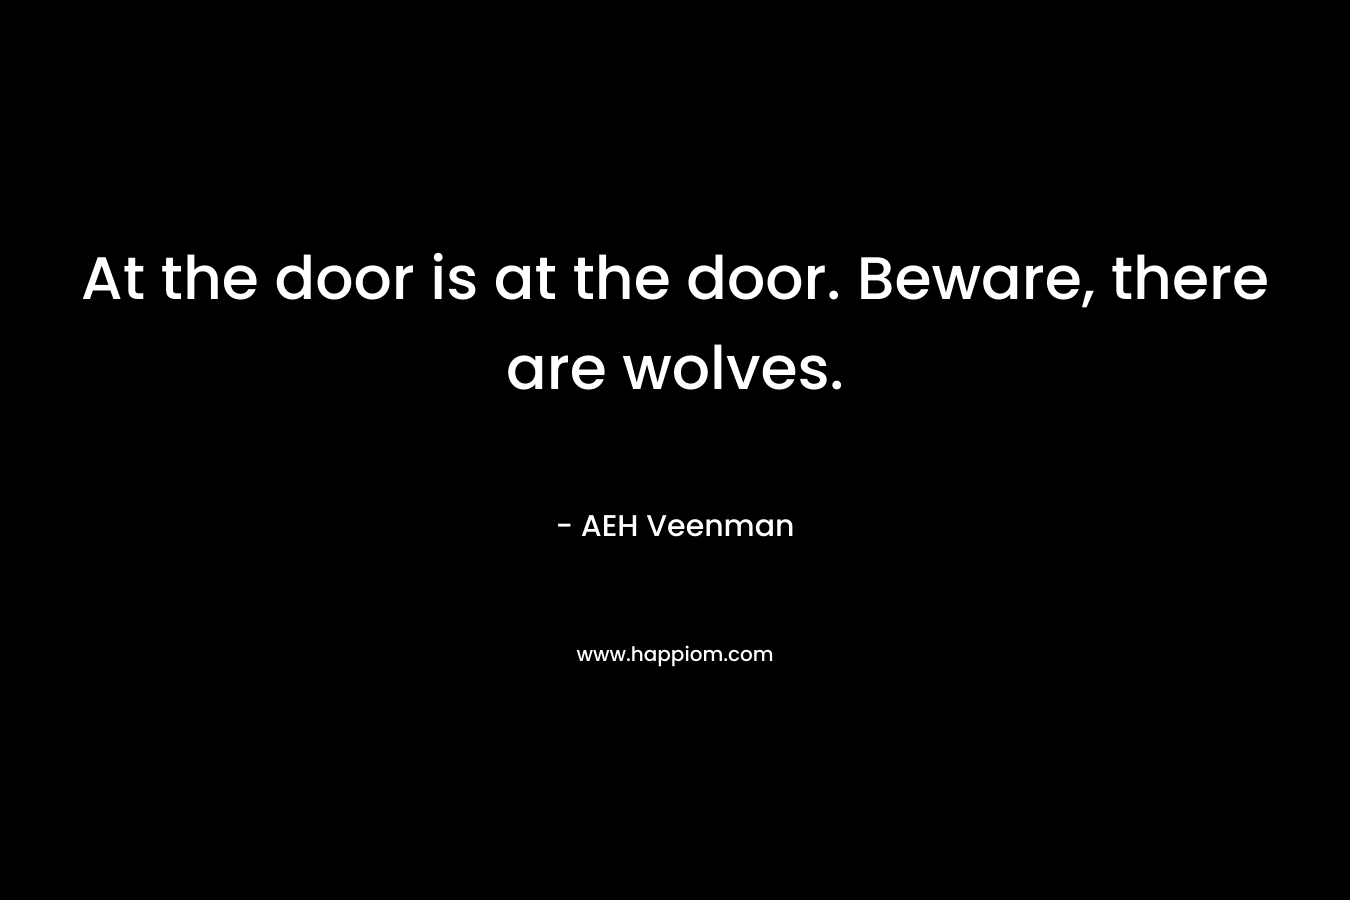 At the door is at the door. Beware, there are wolves. – AEH Veenman